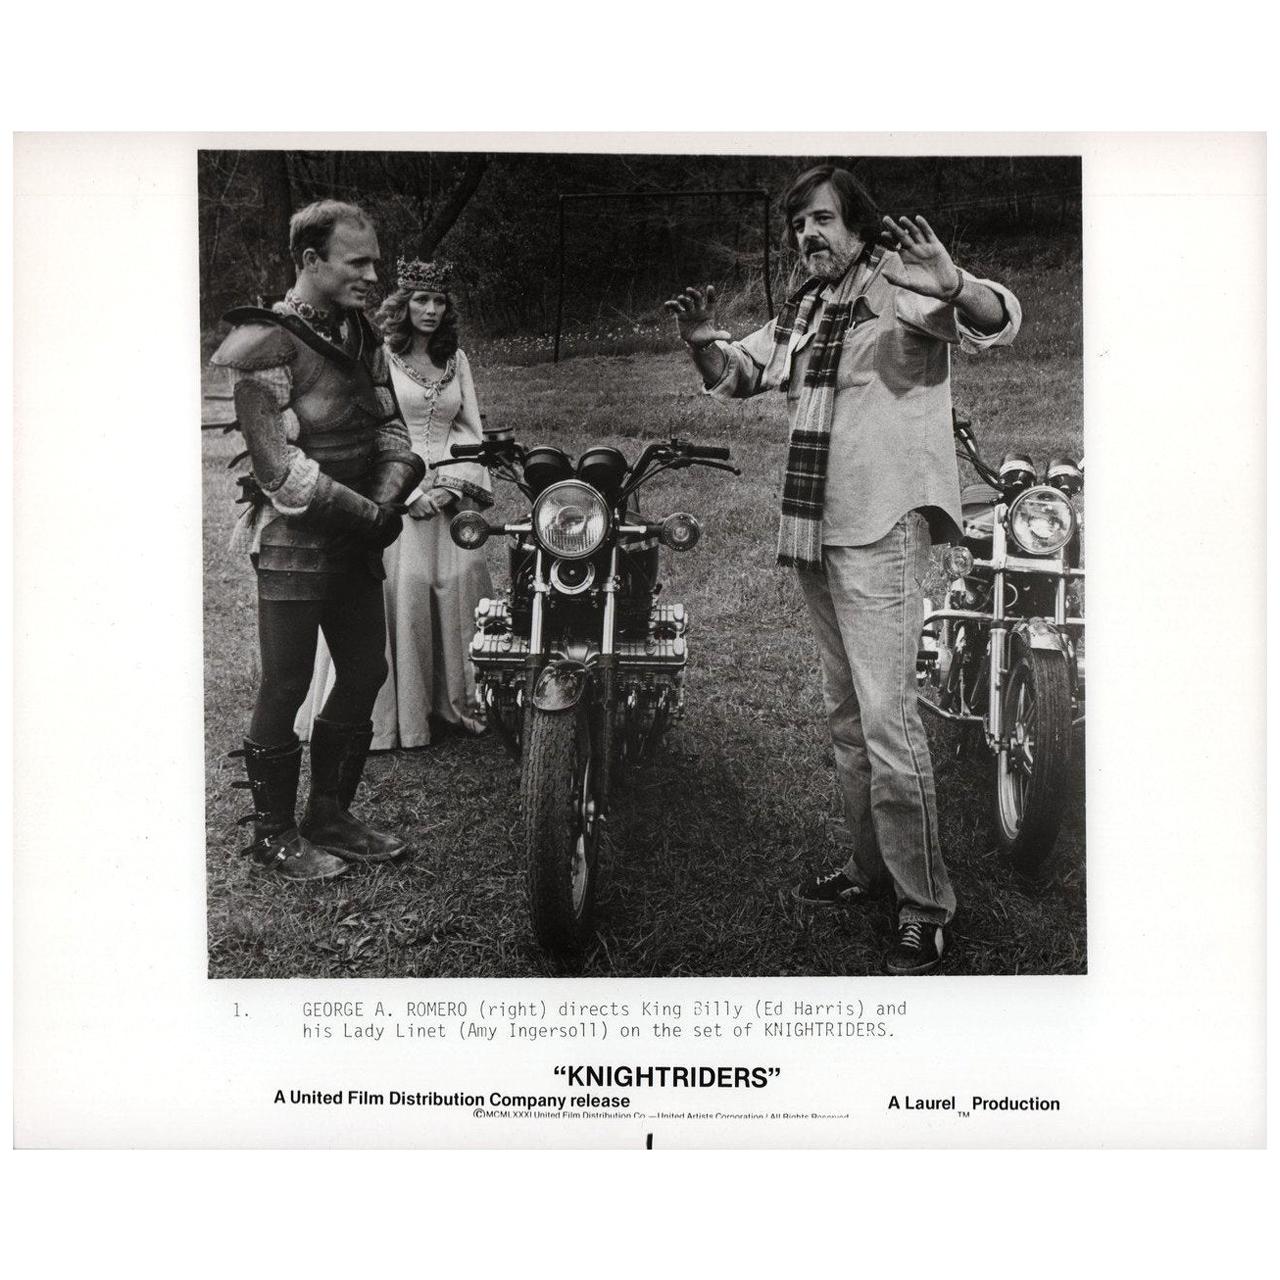 Original 1981 U.S. silver gelatin single-weight photo for the film “Knightriders” directed by George A. Romero with Ed Harris / Gary Lahti / Tom Savini / Amy Ingersoll. Fine condition. Please note: the size is stated in inces and the actual size can